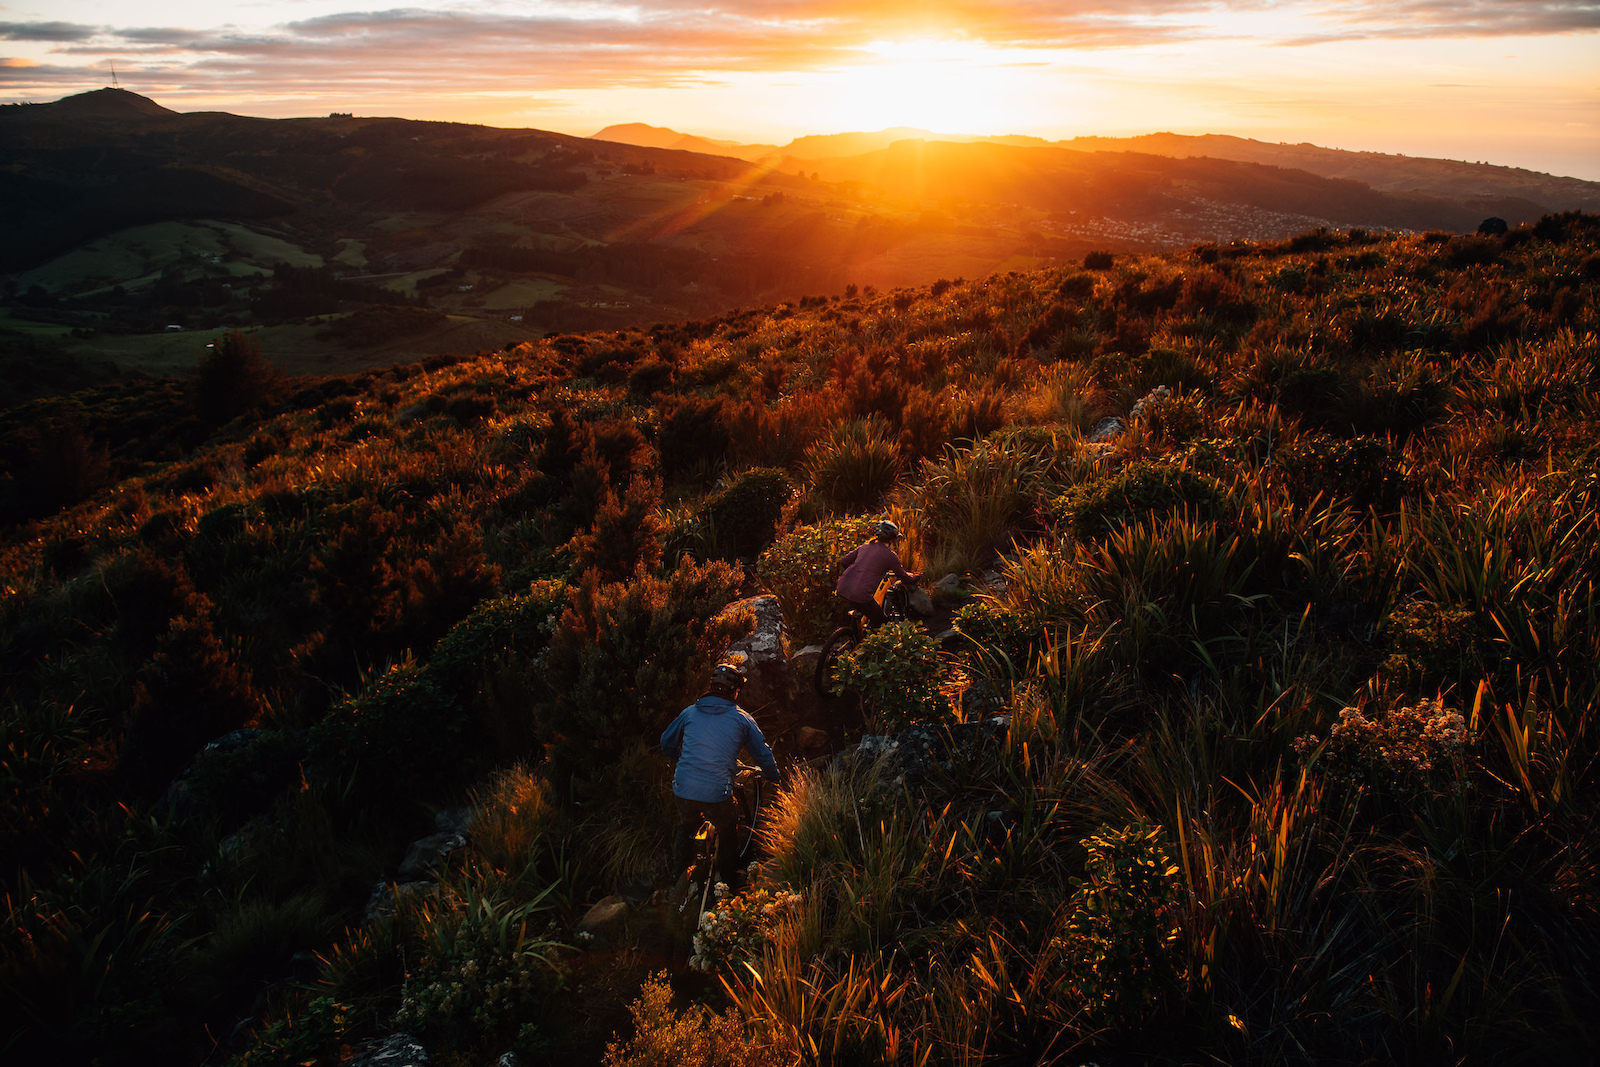 Heading down into the sunrise with a waking Dunedin in the background.